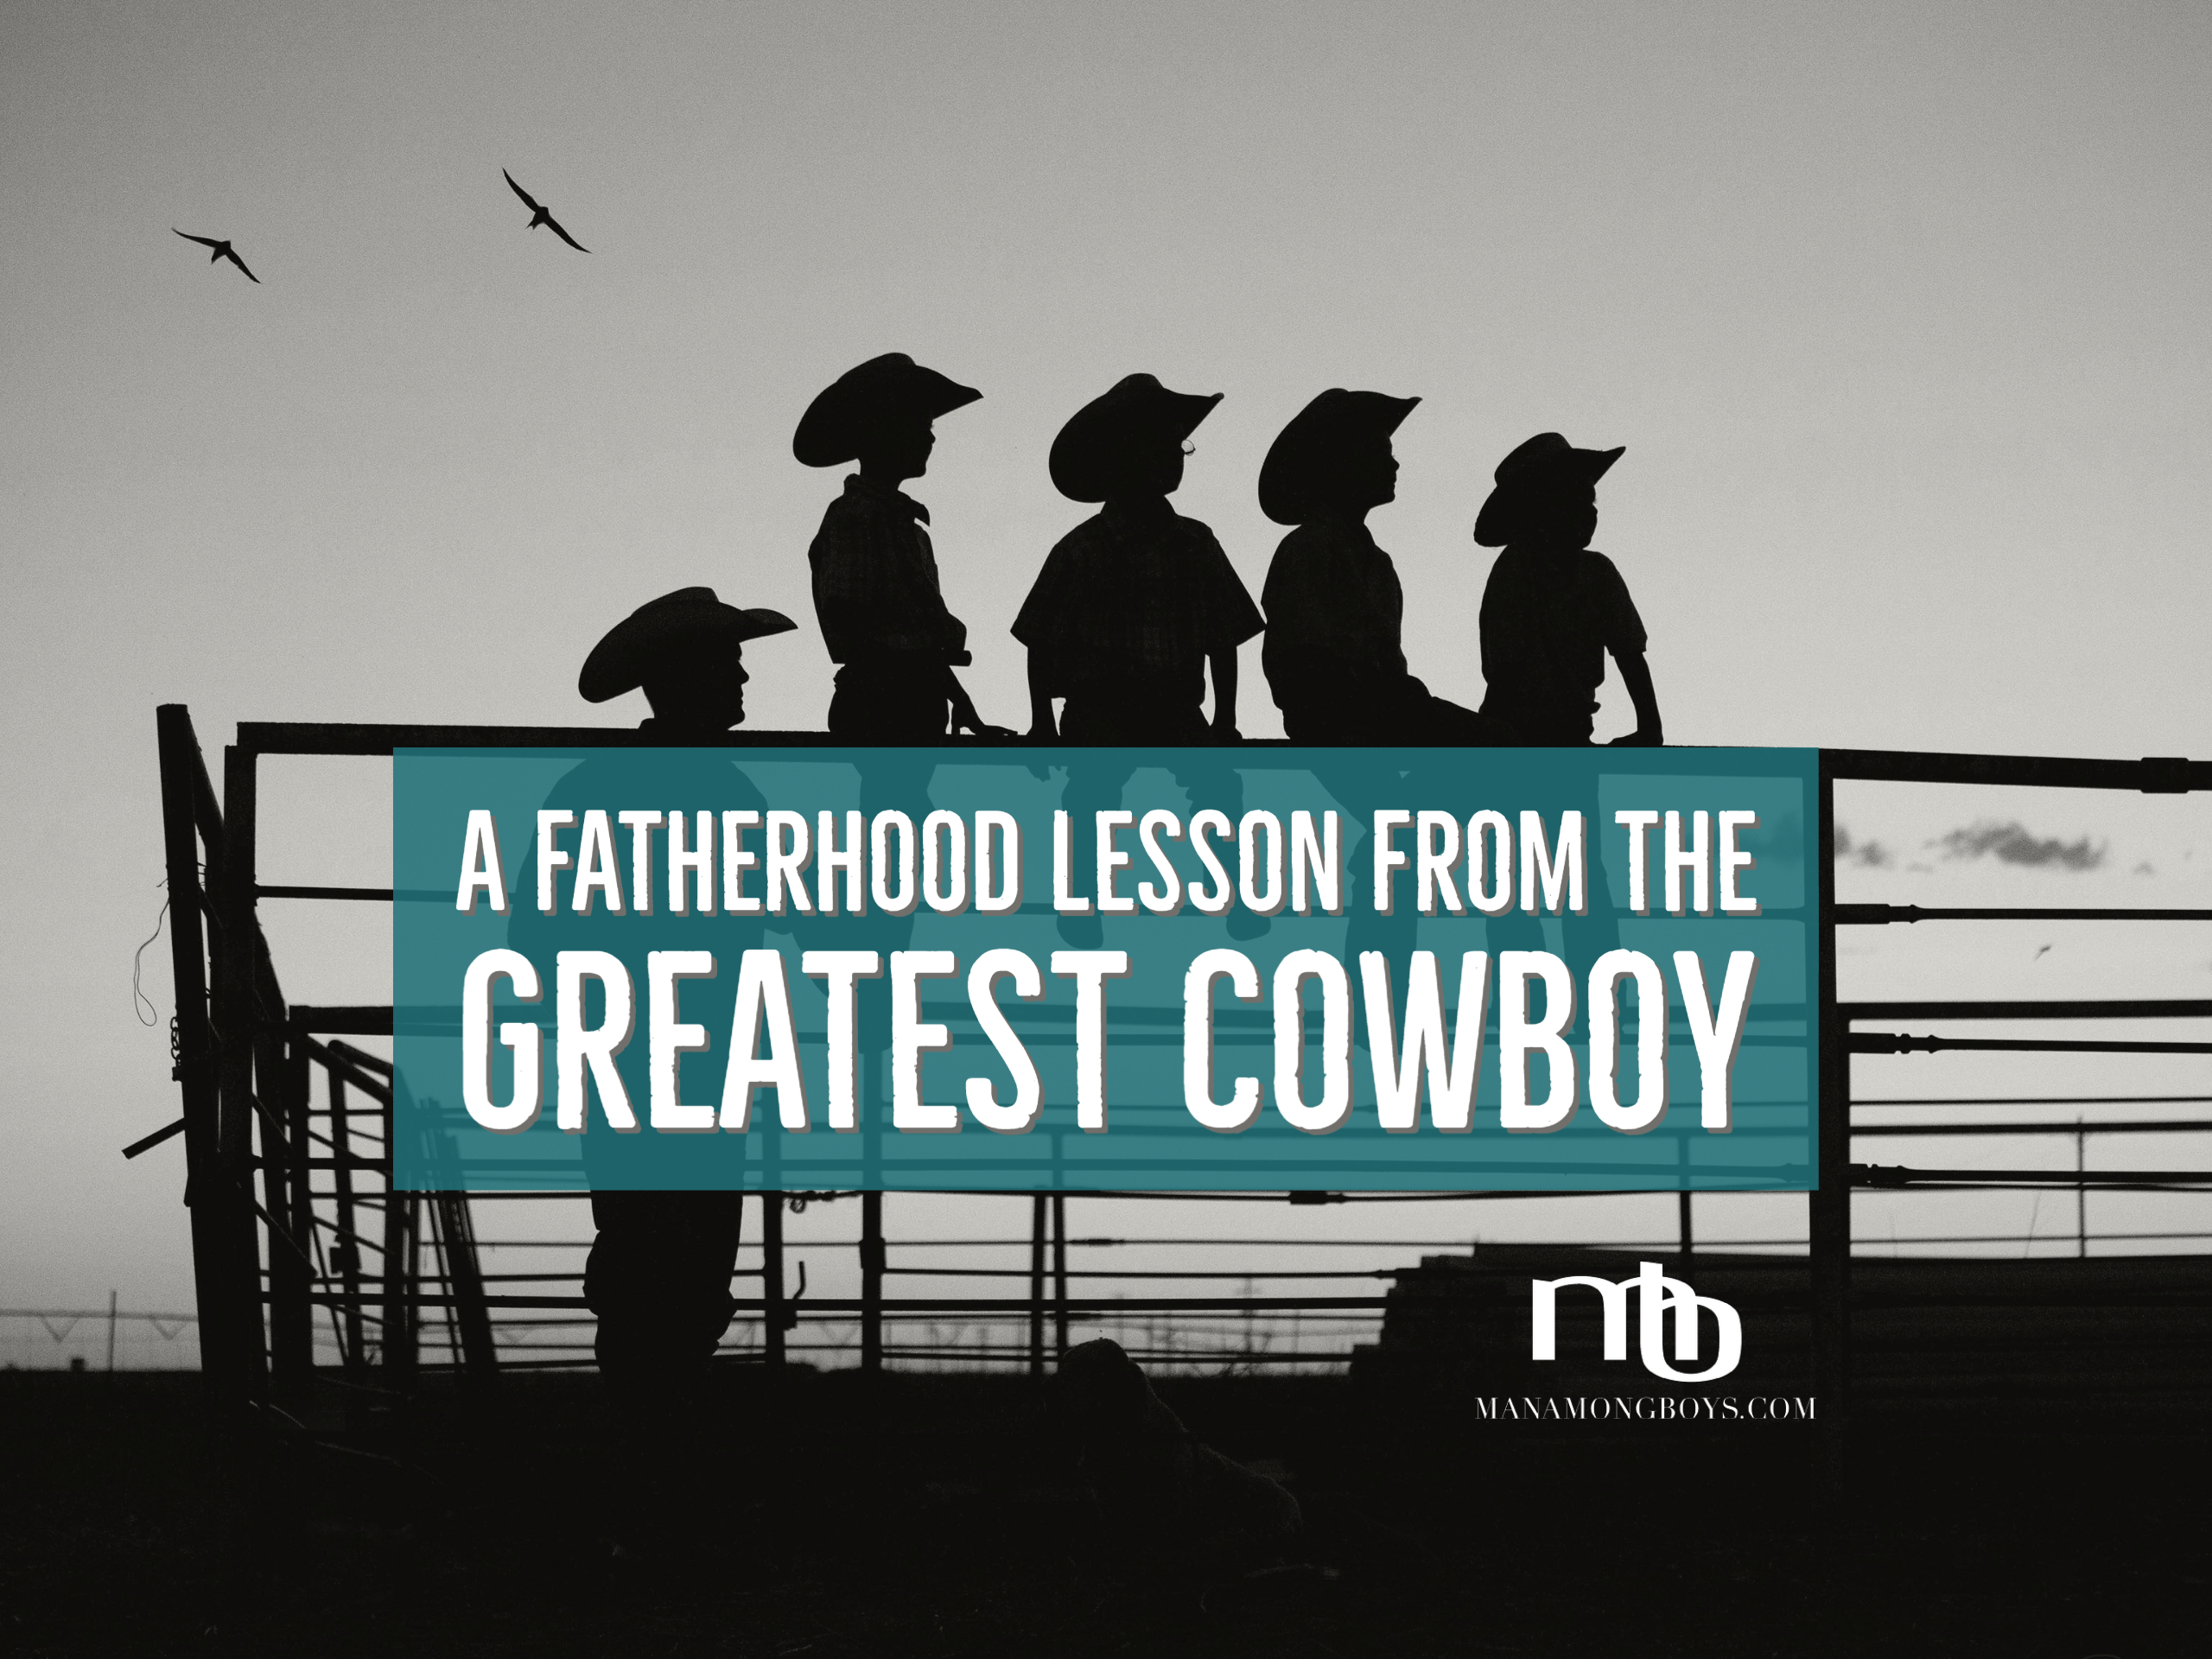 A Fatherhood Lesson From the Greatest Cowboy